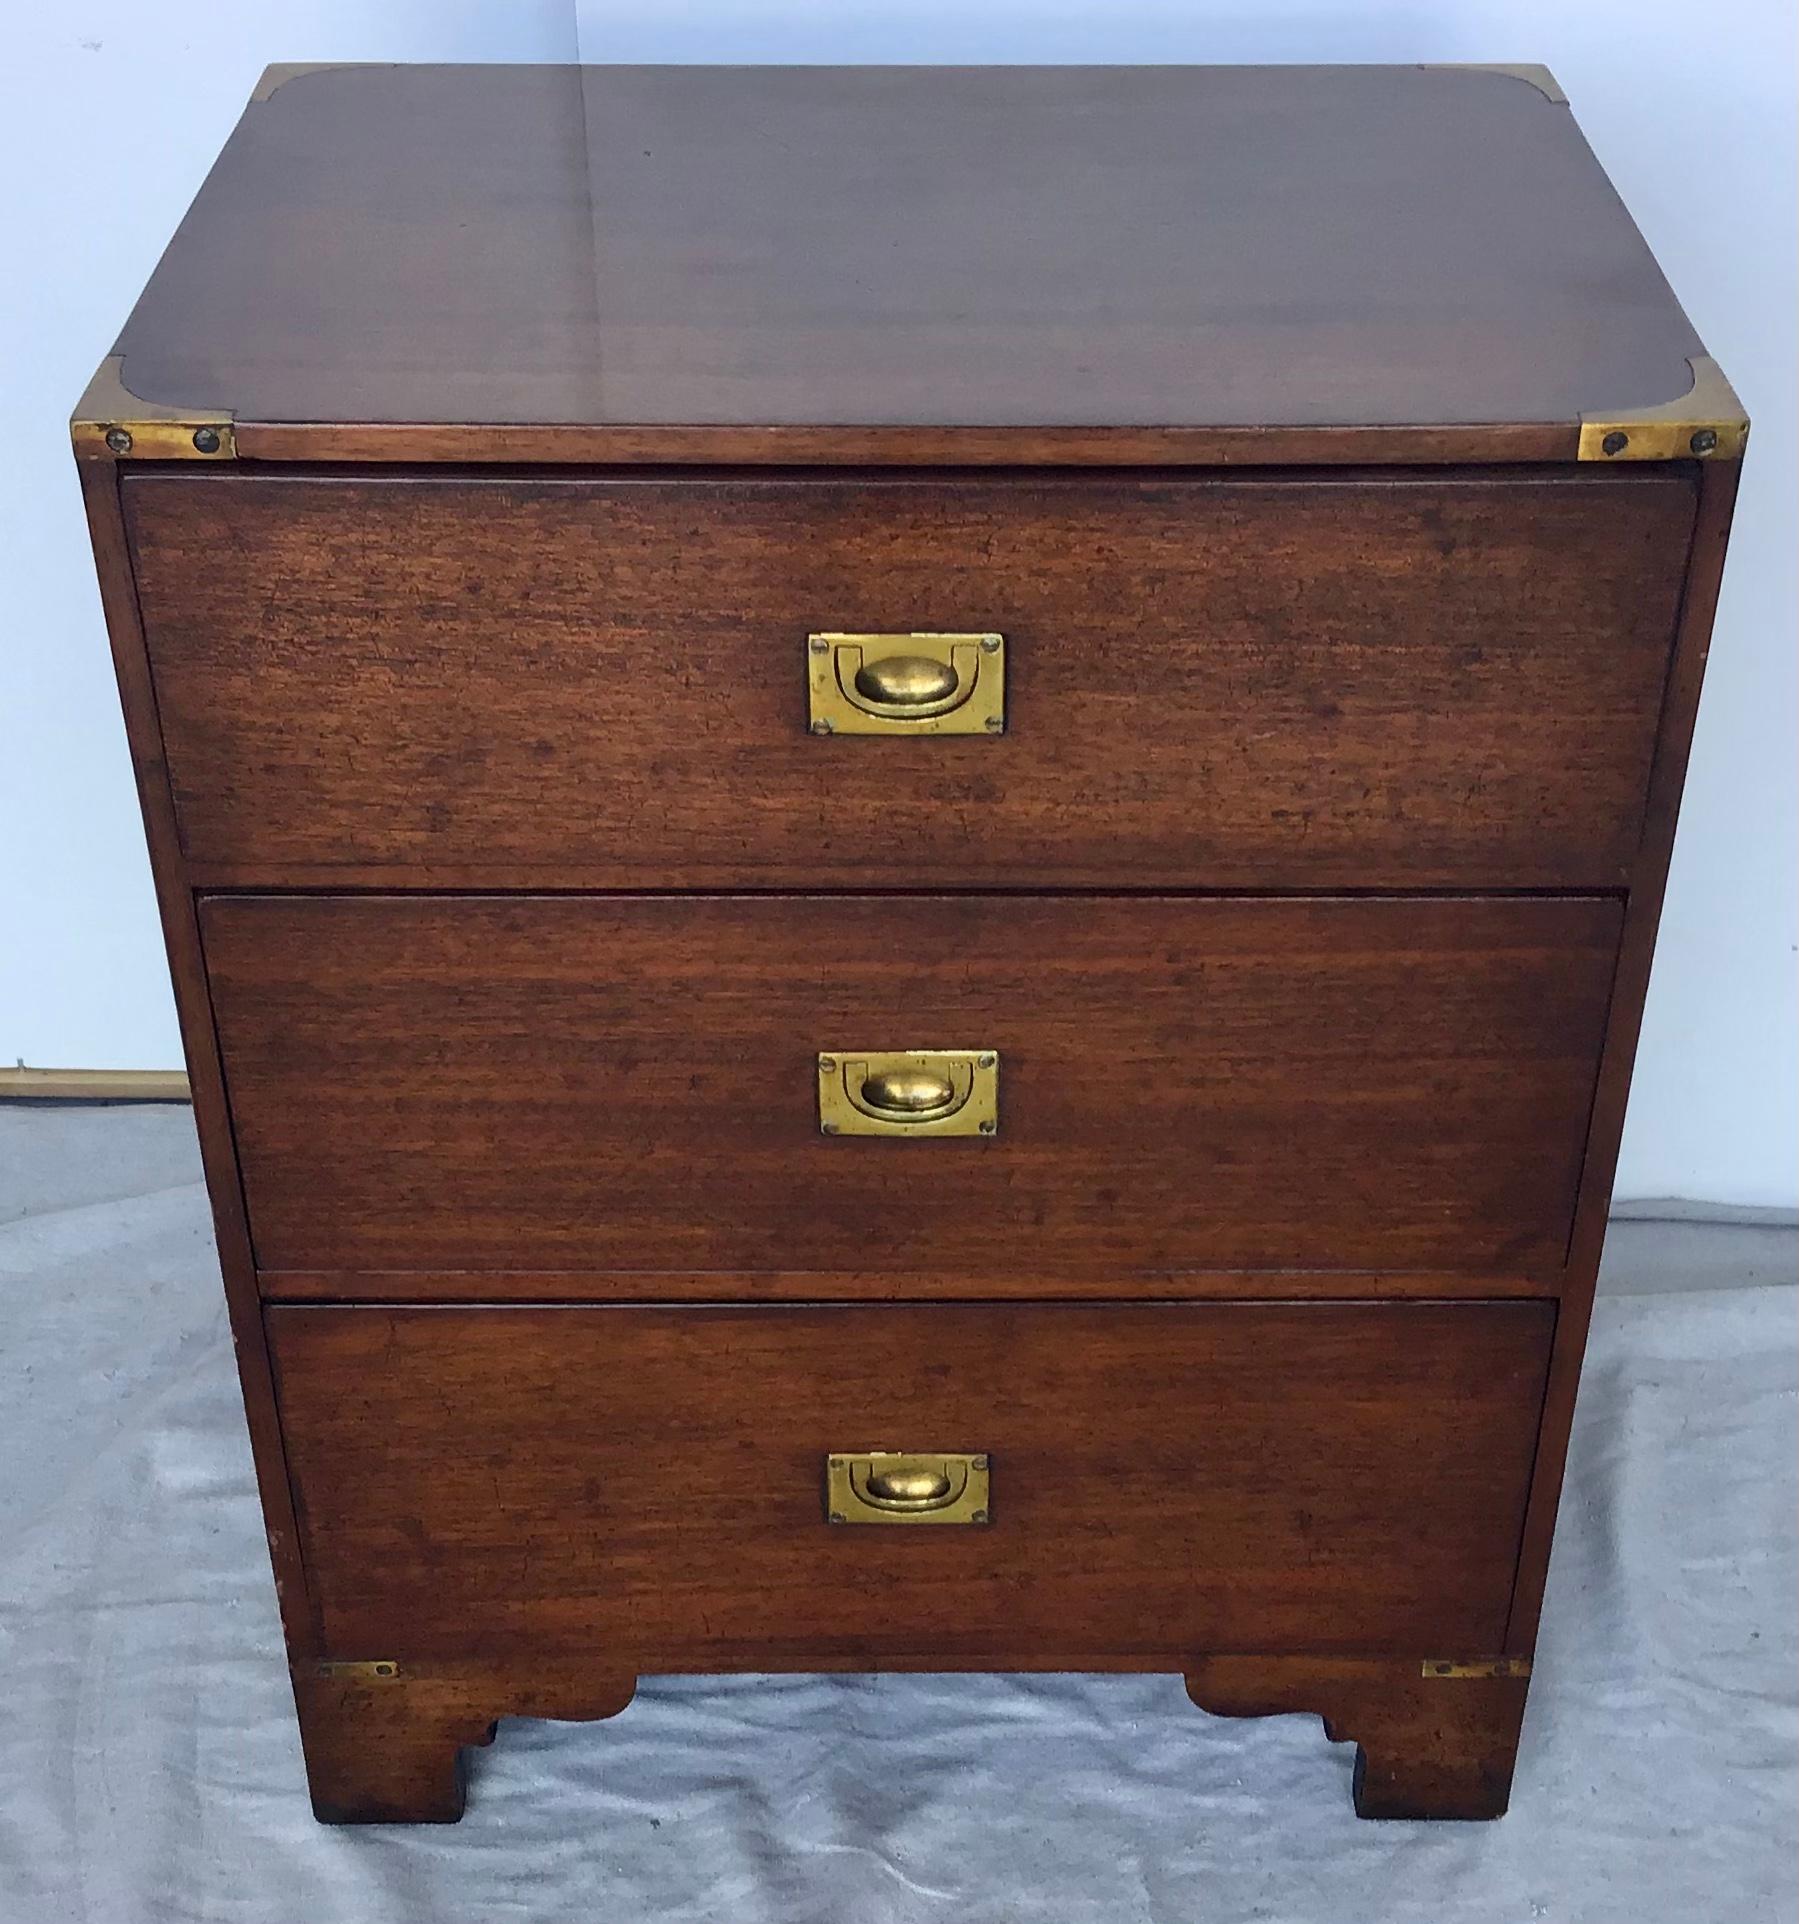 Early 20th century bench made Campaign Side Cabinet, nightstand or side table. Mahogany with brass campaign style hardware on the sides and drawer fronts. Can be used as a side table or next to the bed. 